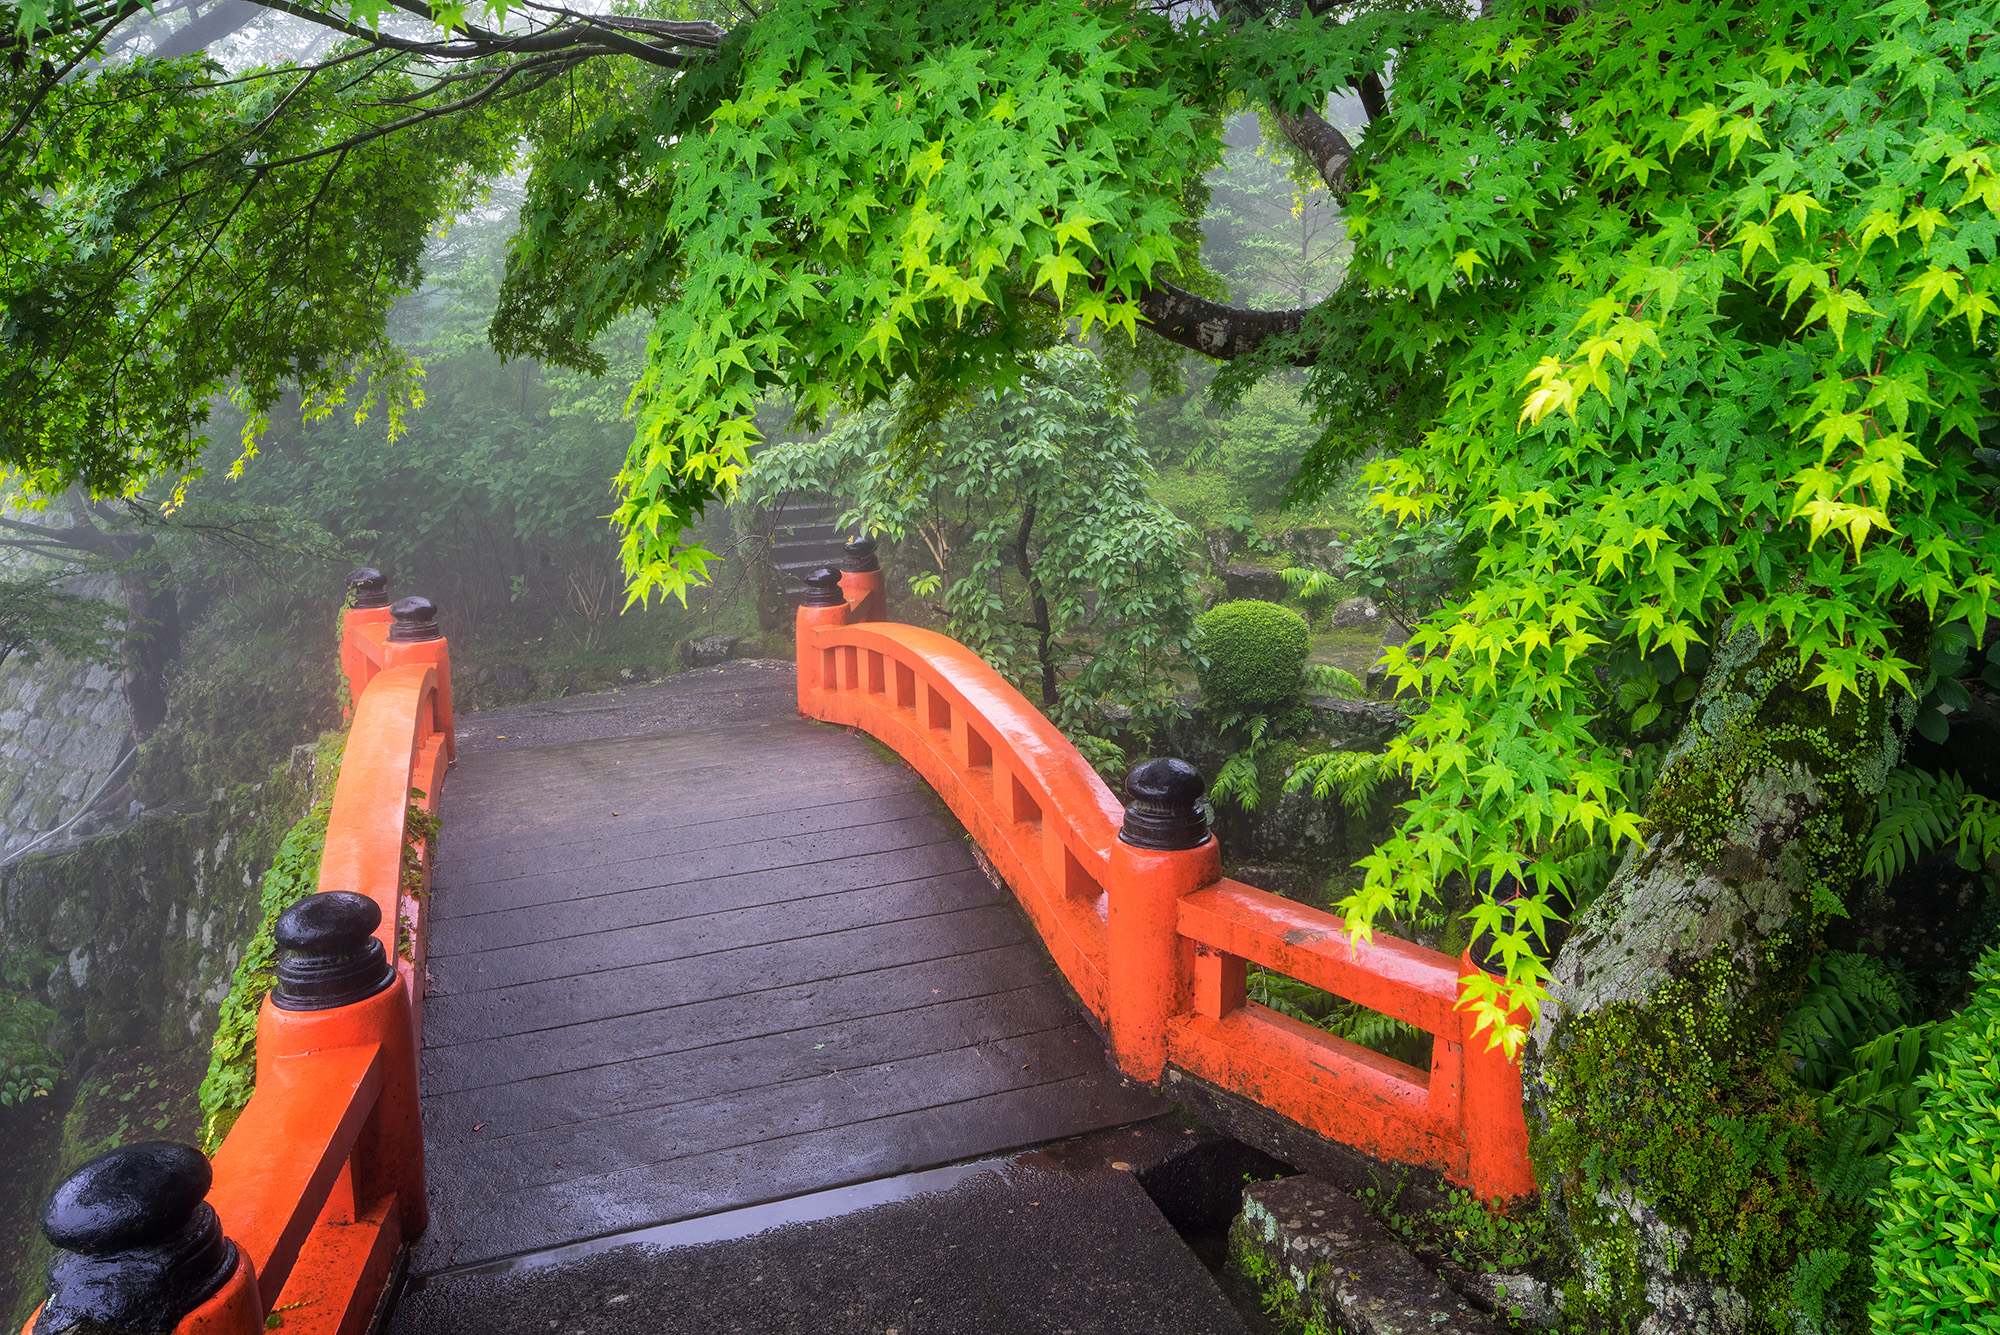 In the midst of a gentle rain at Seiganto-ji Temple in Nachisan, Japan, this image paints a vivid picture of tranquility. The...